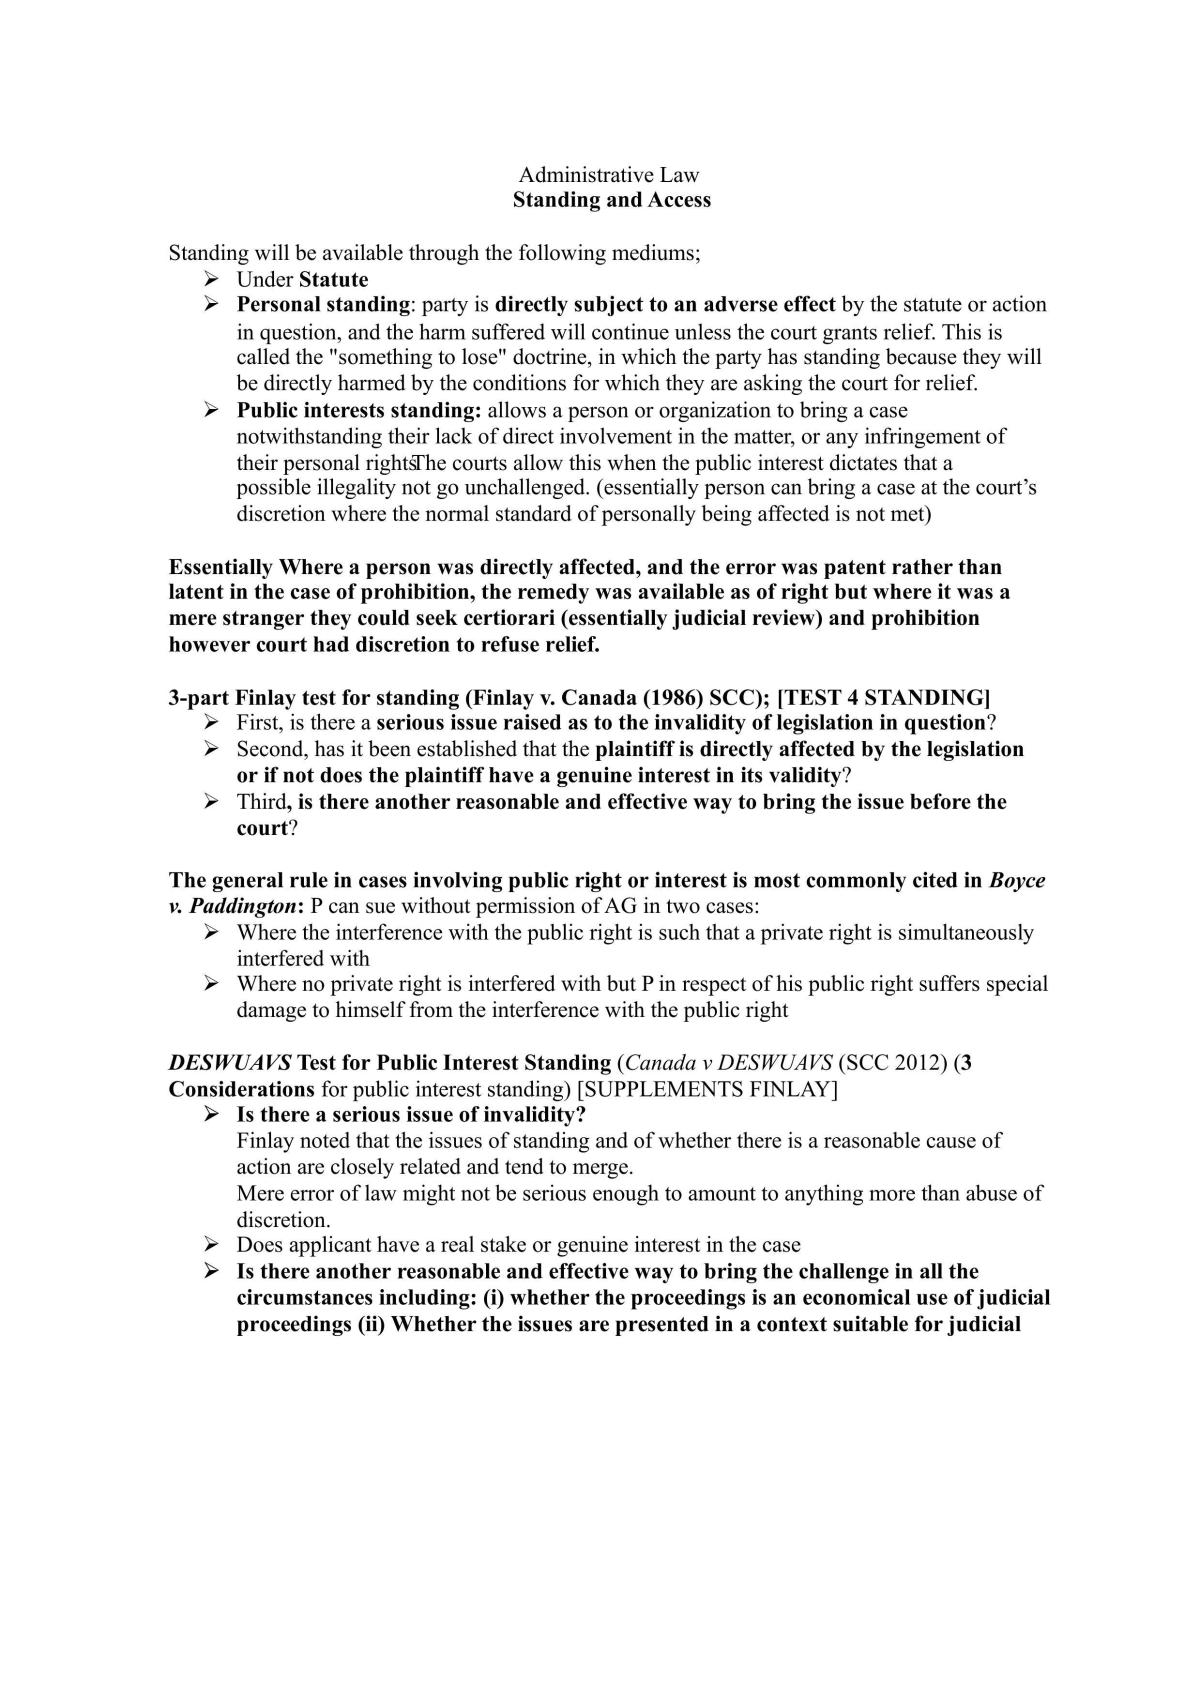 Canadian Administrative Law Study Notes - Page 1